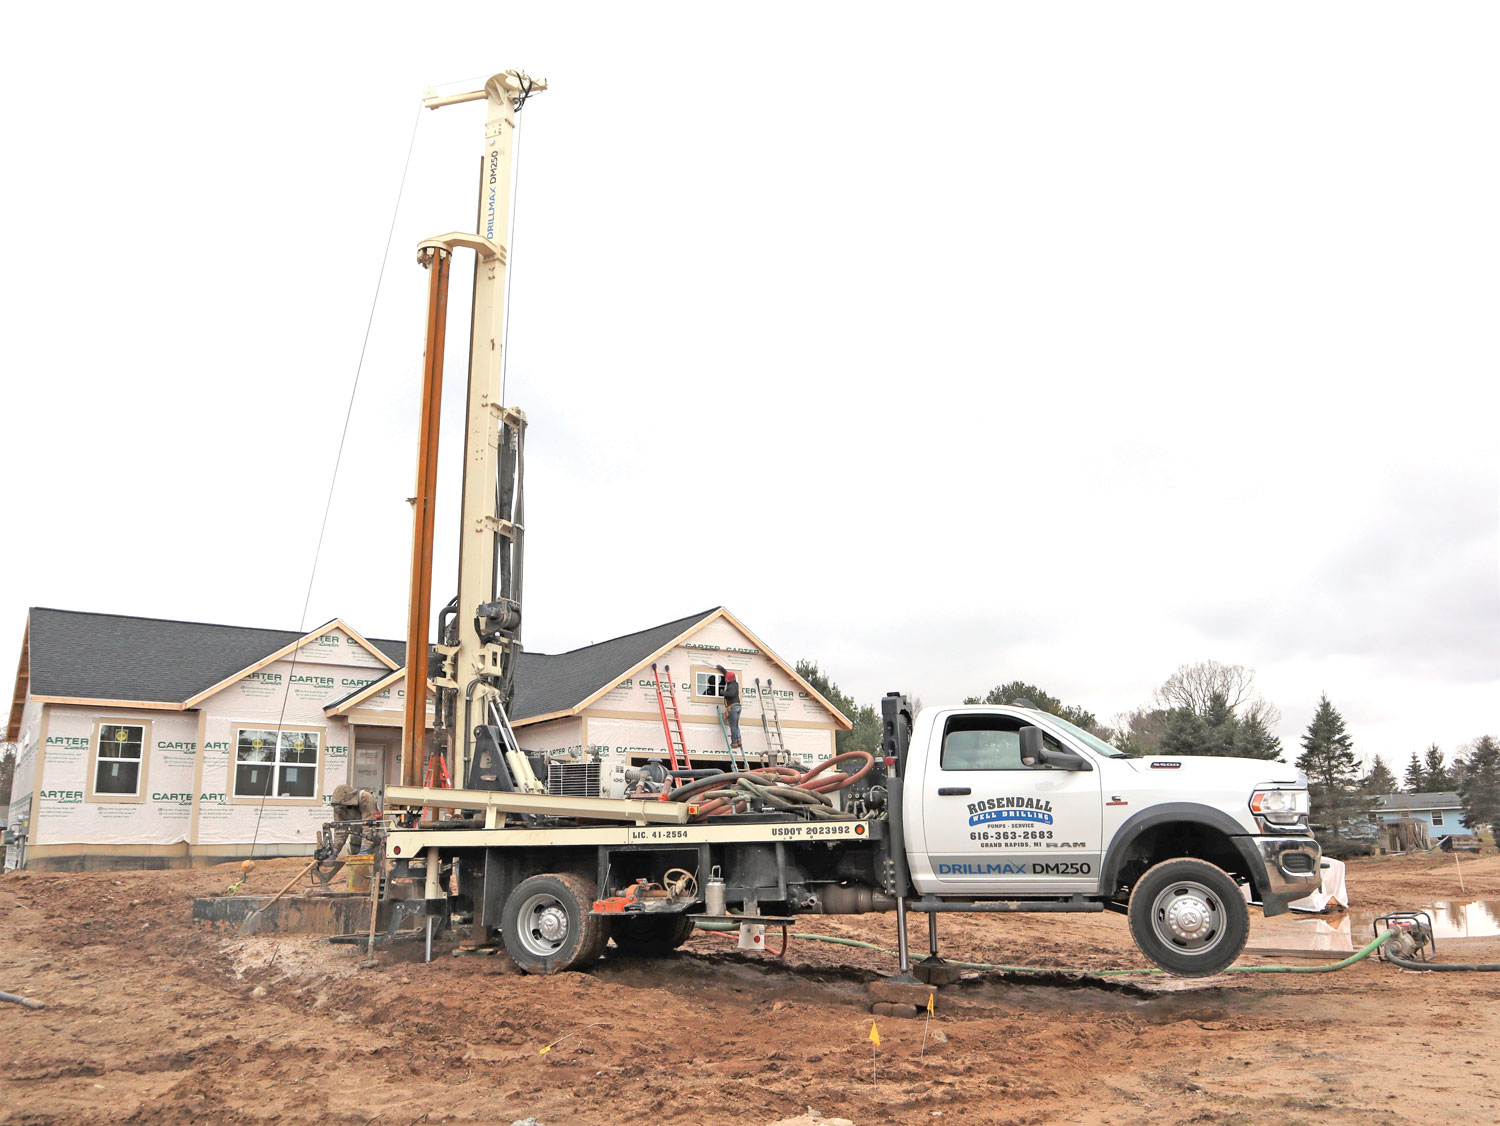 Lightweight DM250 outperforms bigger rigs, using less fuel and increasing maneuverability on tricky residential water well drilling sites. 